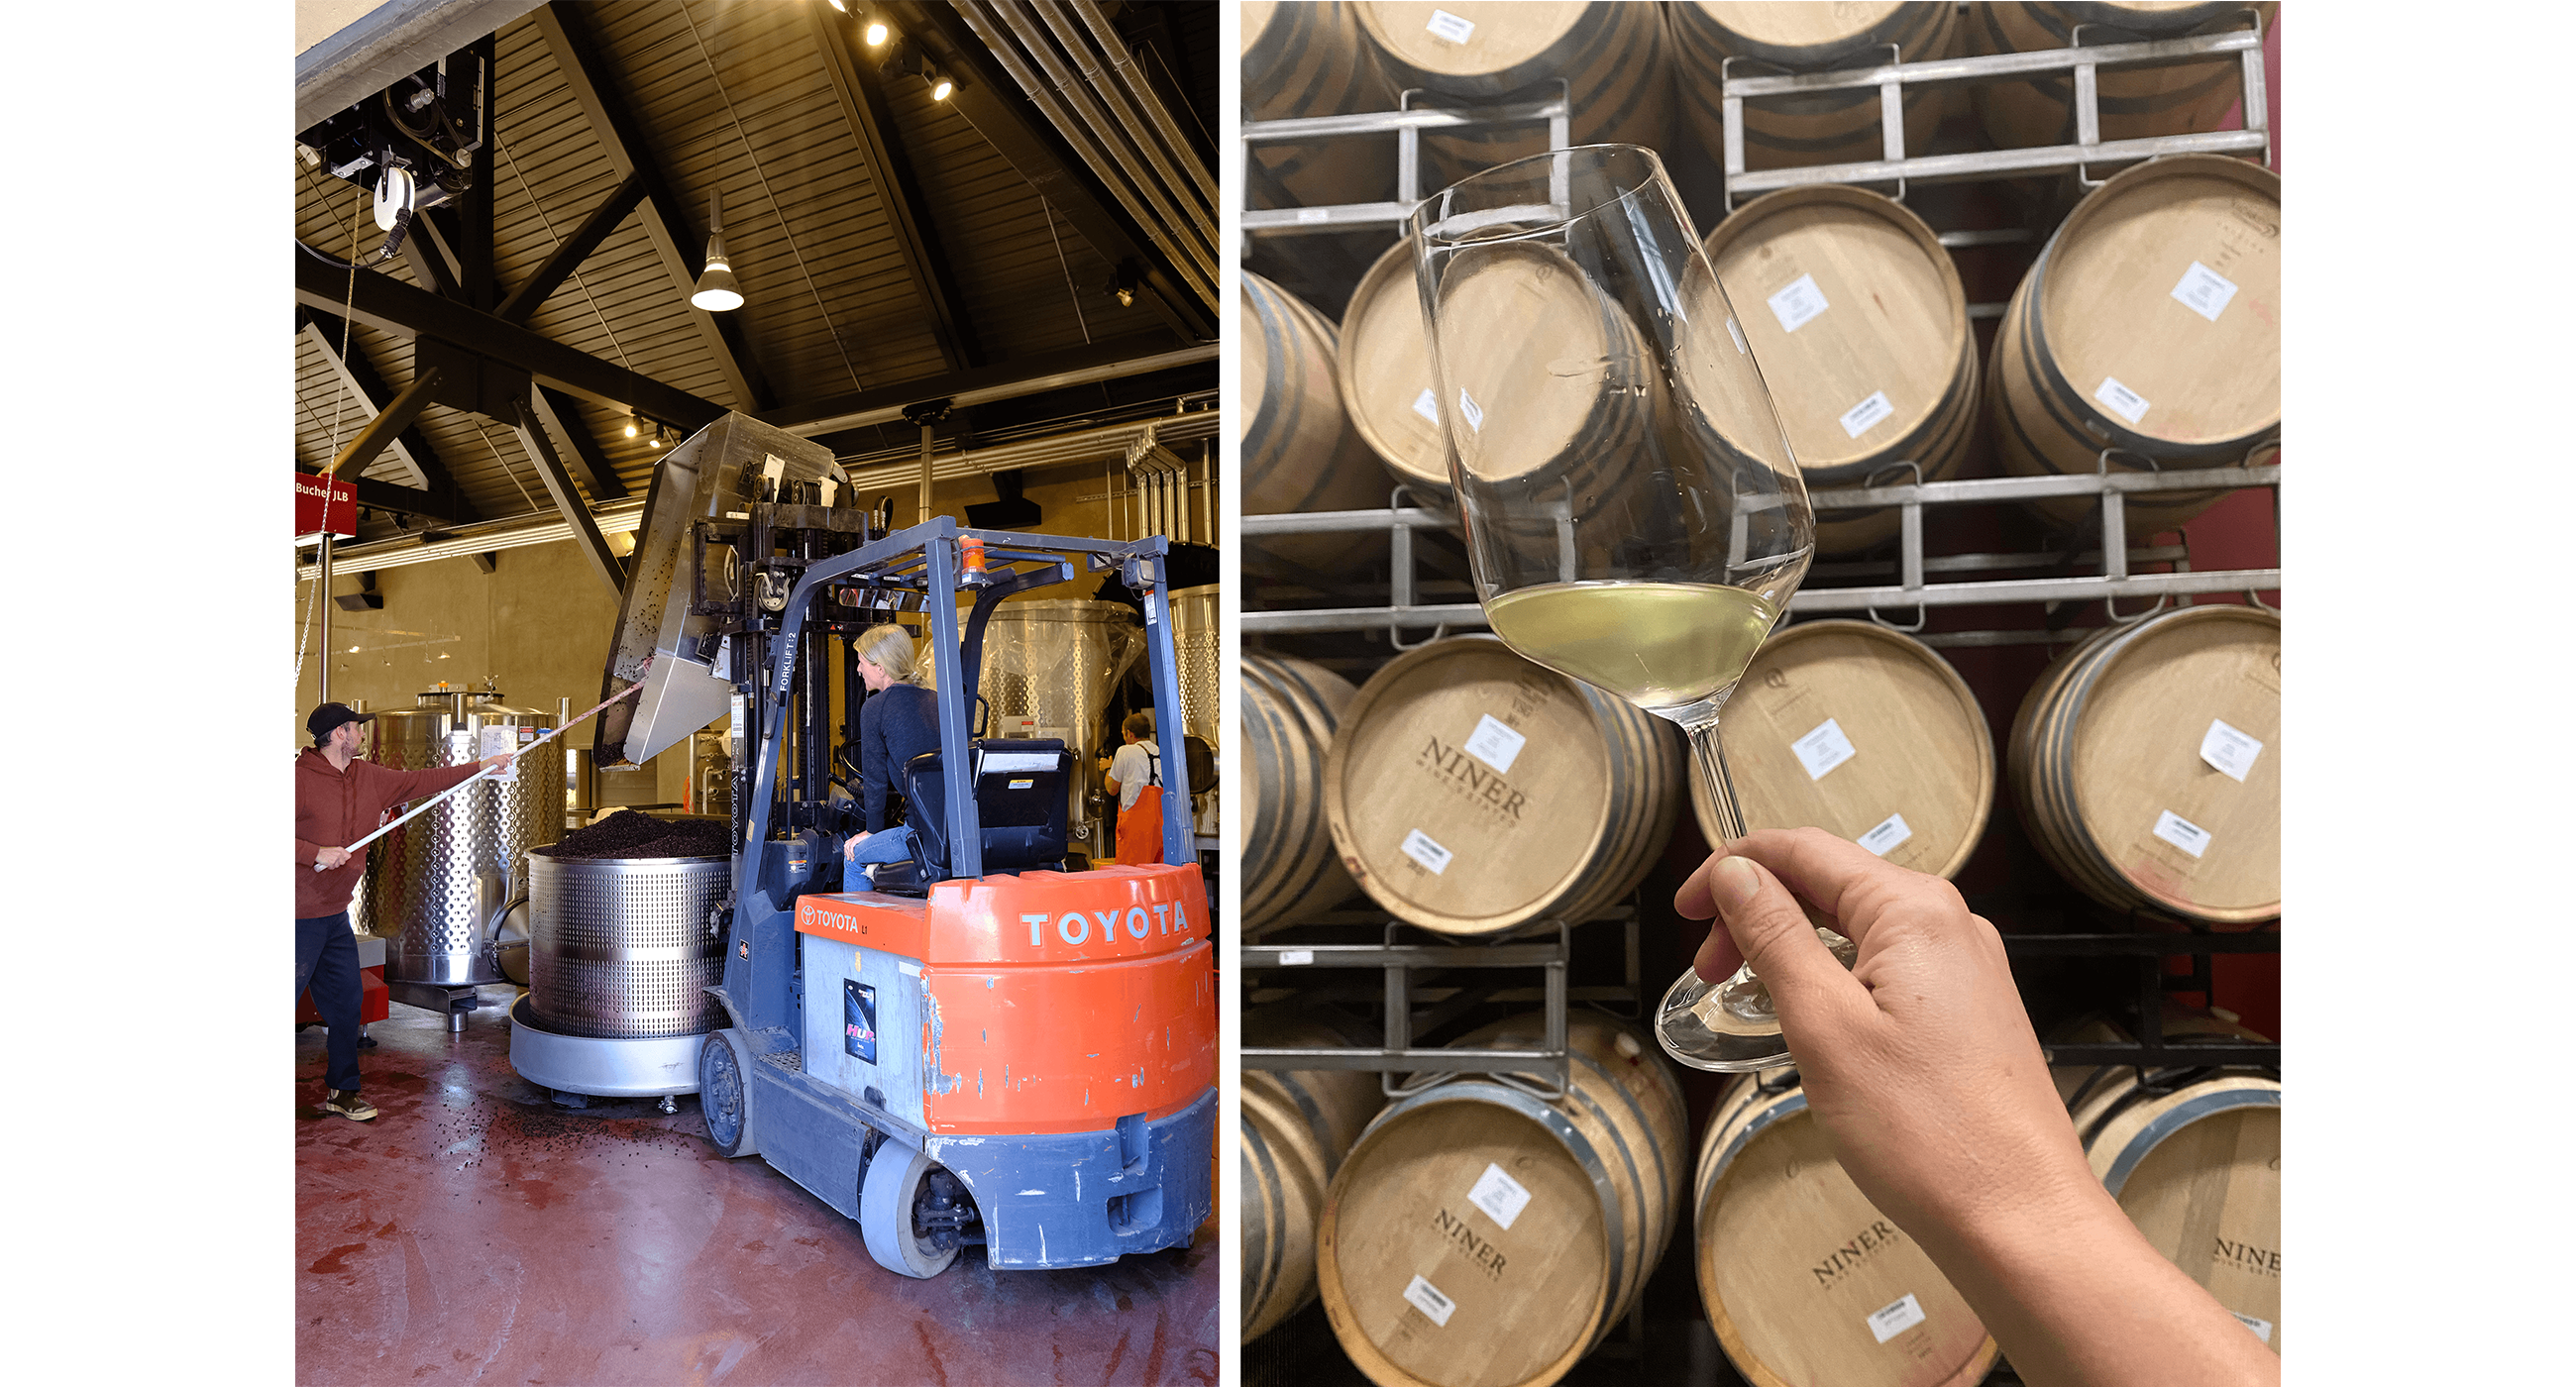 Two photos are shown. On the right, our Winemaker uses a forklift to load a grape press with Pinot Noir. On the right, a glass of Chardonnay is shown against a backdrop of wine barrels.